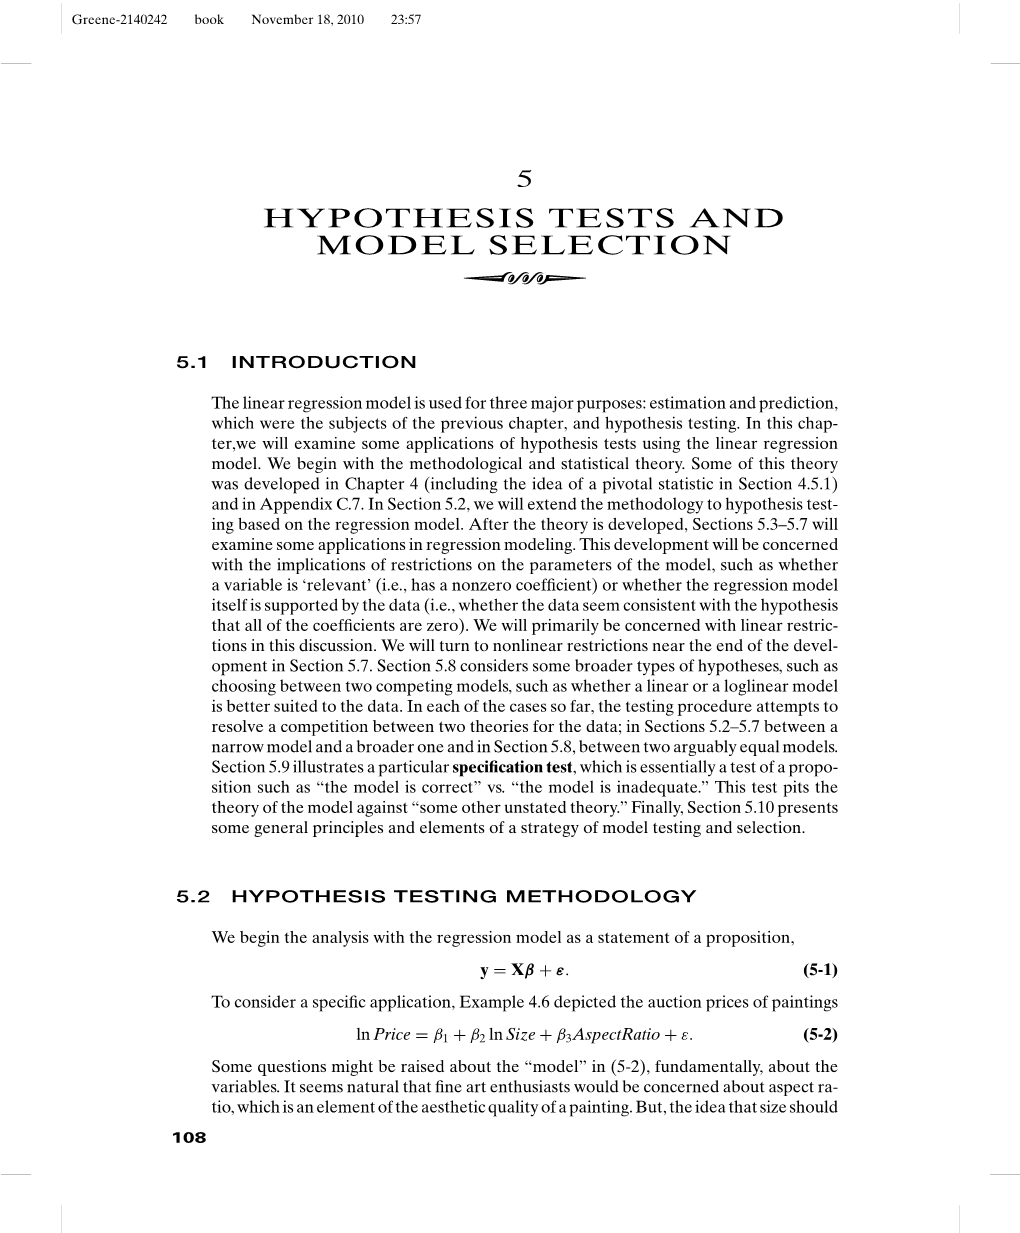 Hypothesis Tests and Model Selection 109